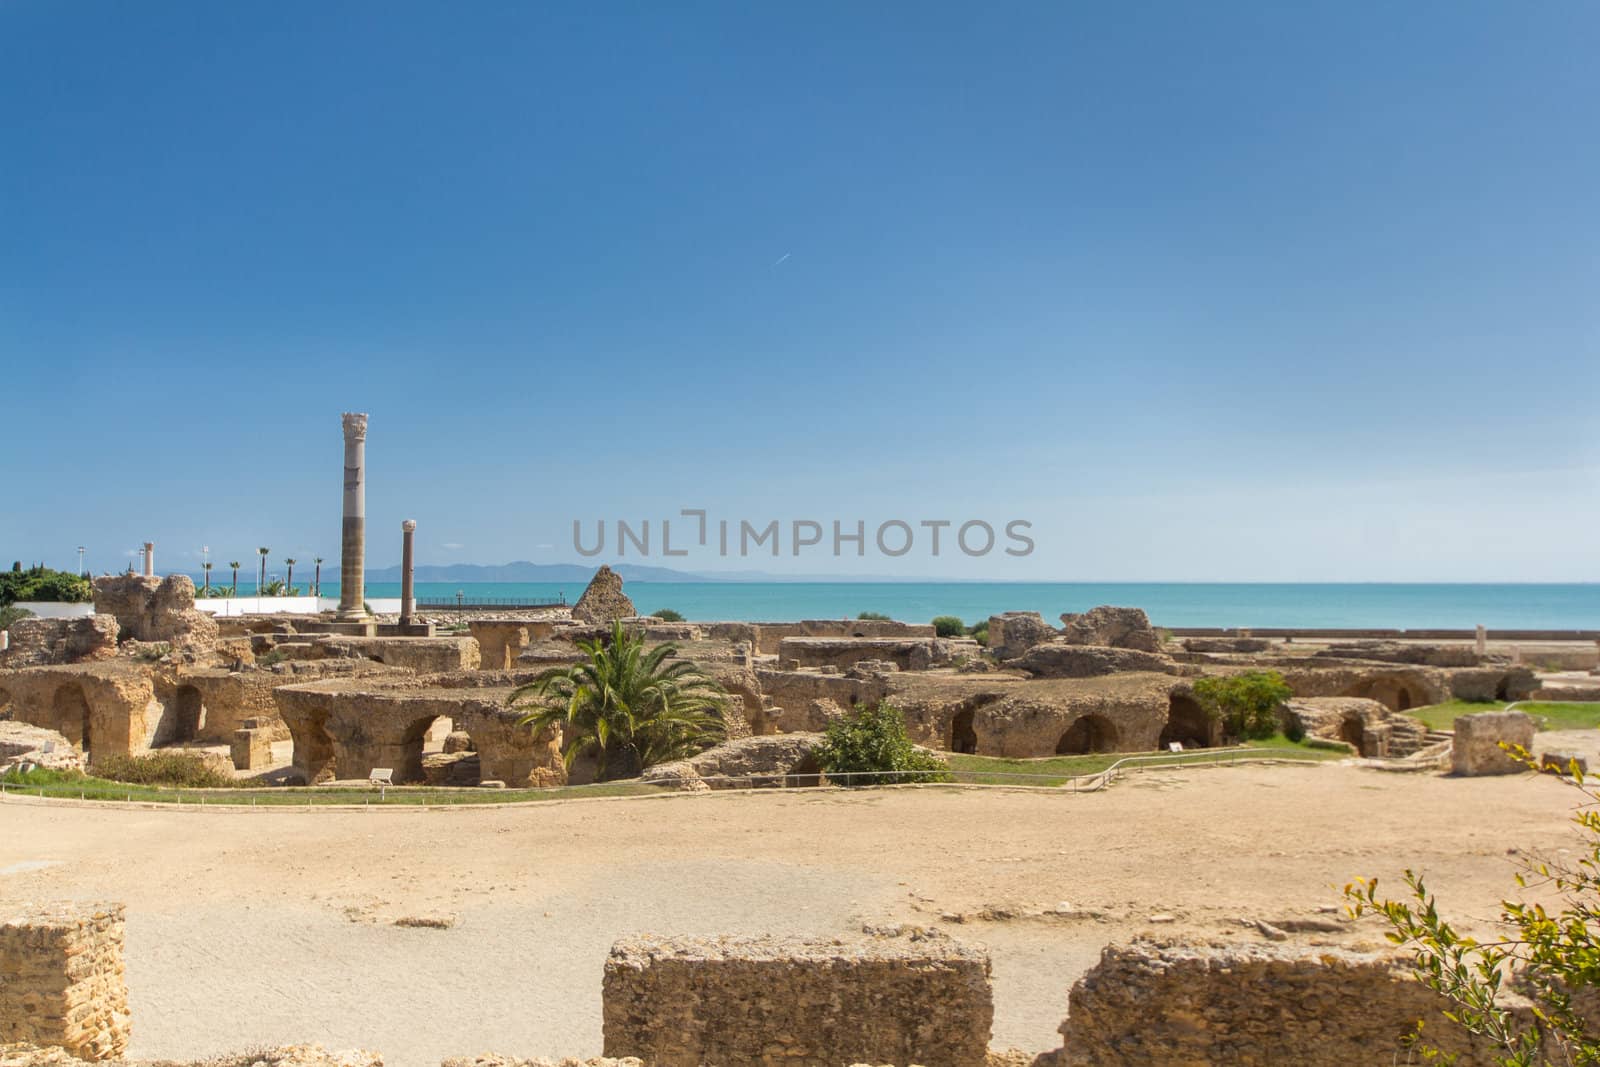 Ruins in ancient Carthage town, a UNESCO World Heritage site in Tunisia with ruins of great buildings, theaters, villas, baths, houses and columns from the great Punic and Roman empires